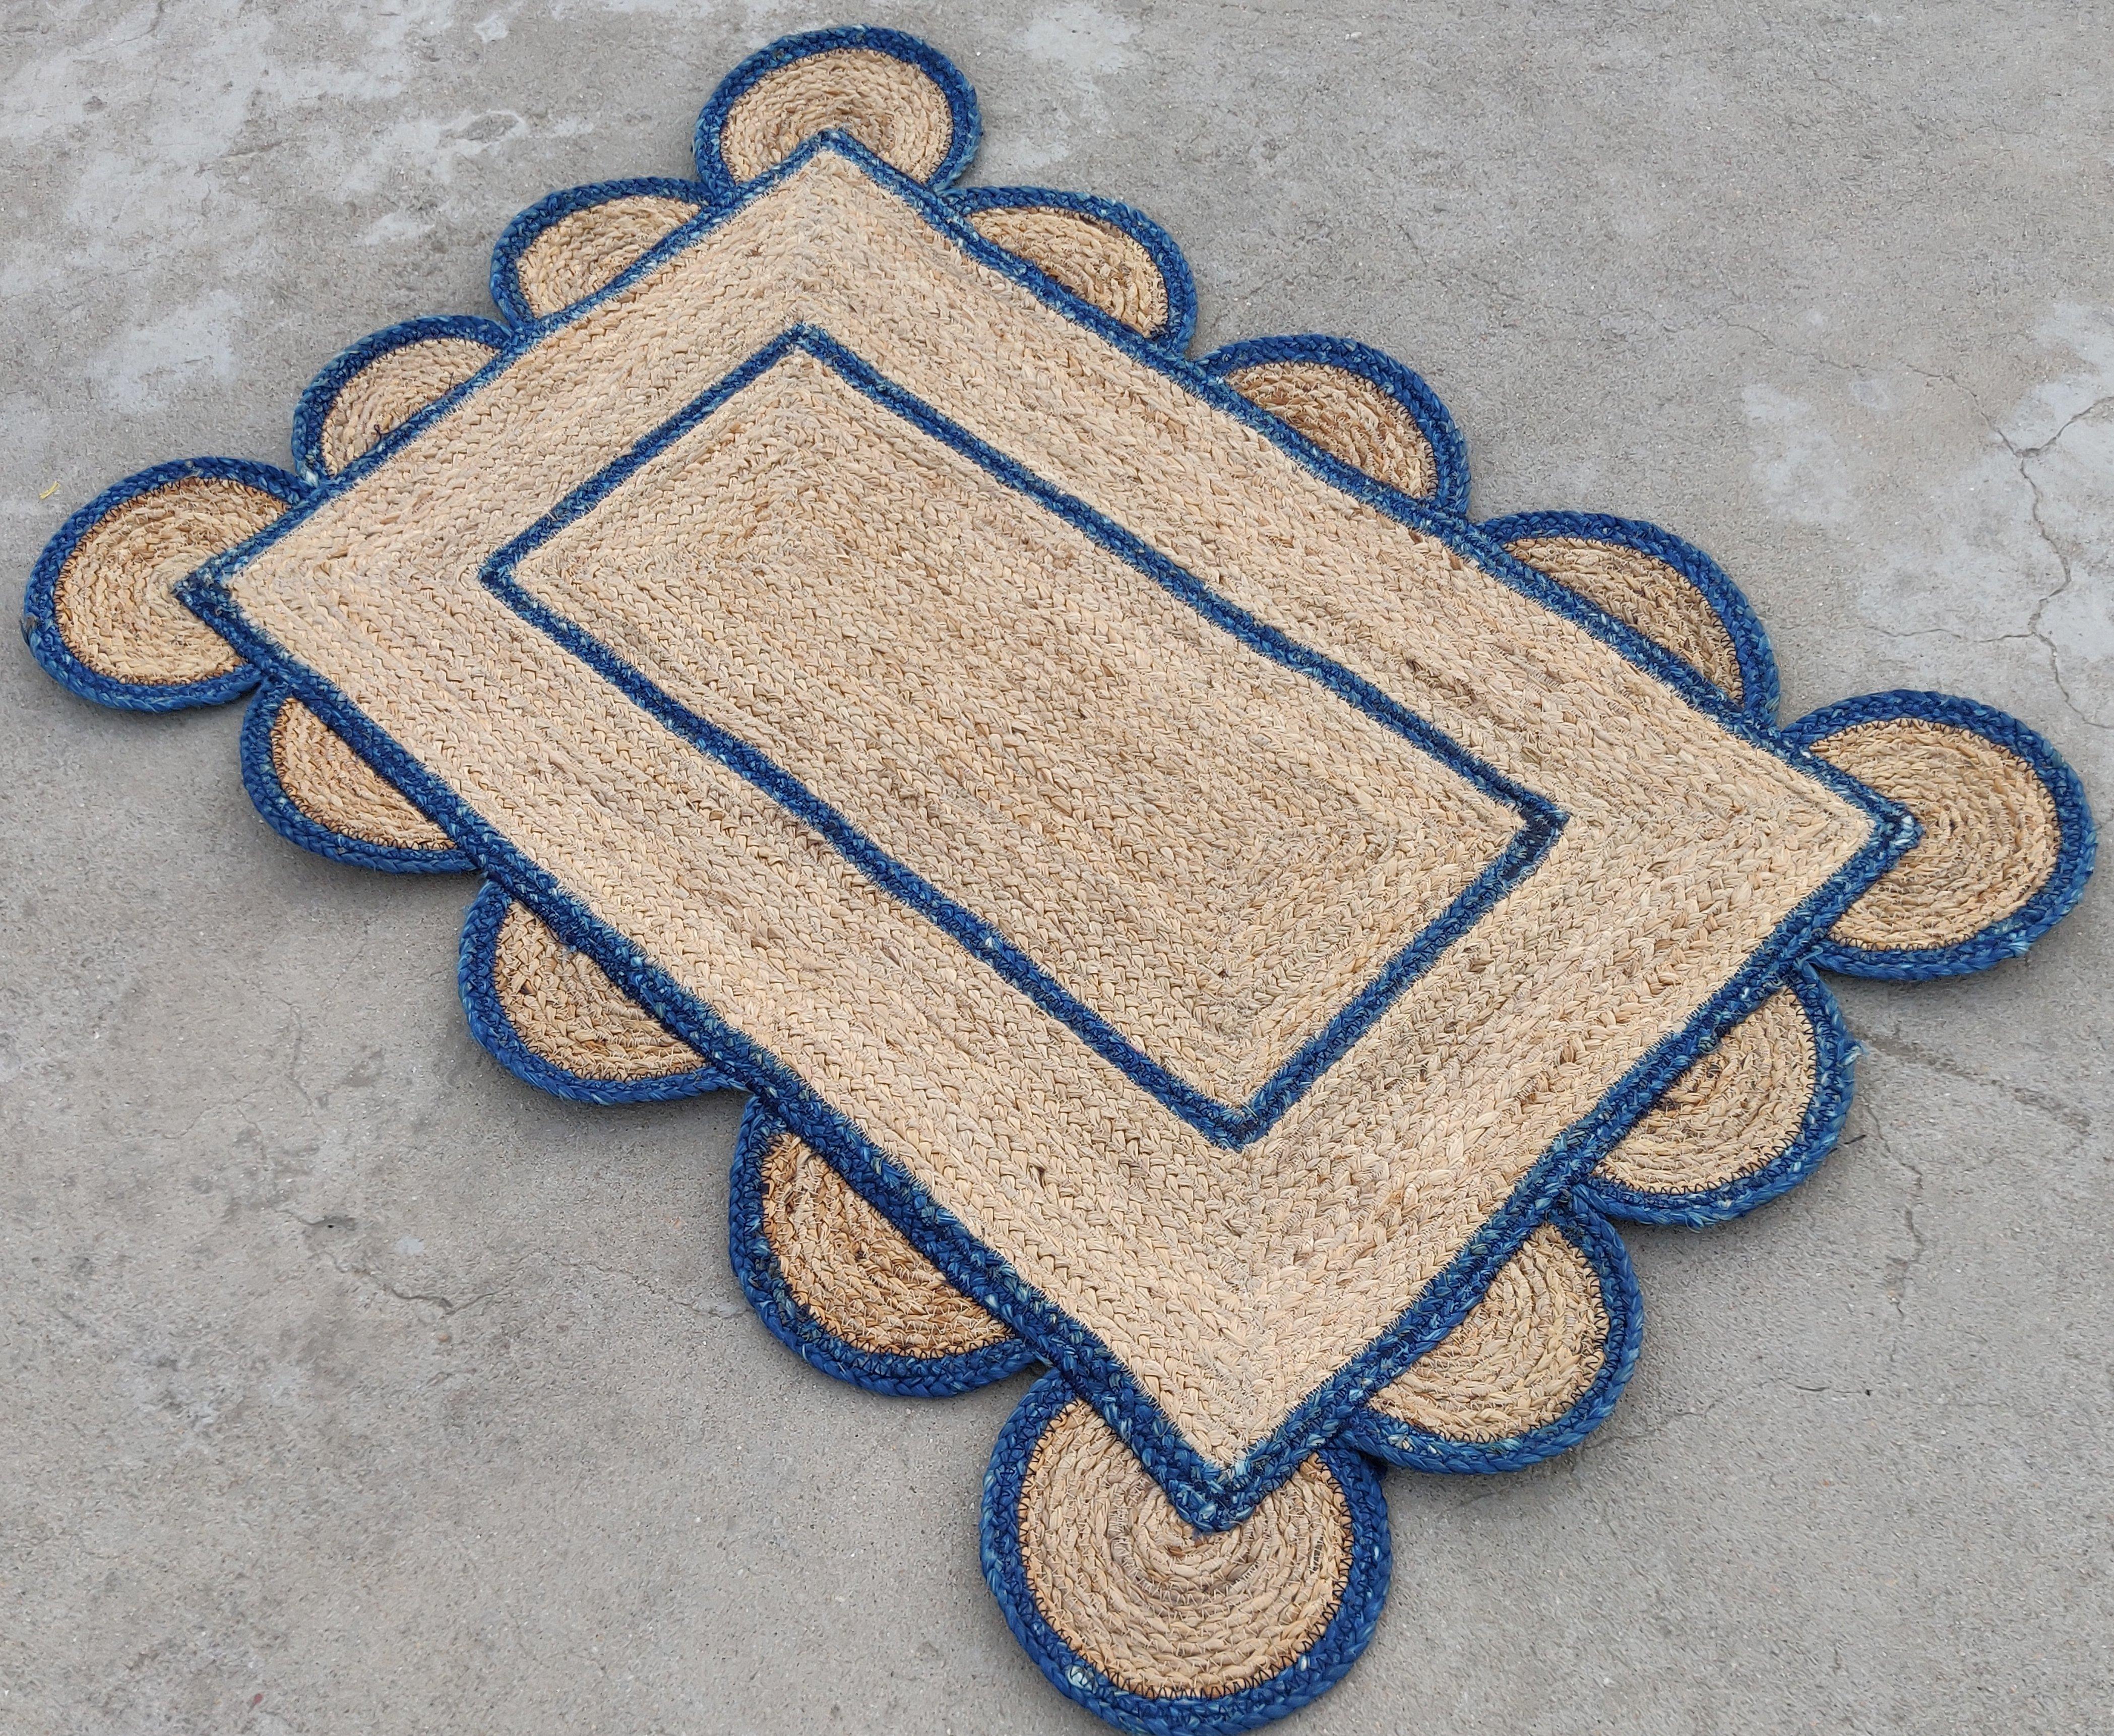 Handmade Jute Scalloped Rug, Natural Jute Dhurrie with Teal Blue Border -2'x3'

These special flat-weave dhurries are hand-woven with 15 ply 100% cotton yarn. Due to the special manufacturing techniques used to create our rugs, the size and color of